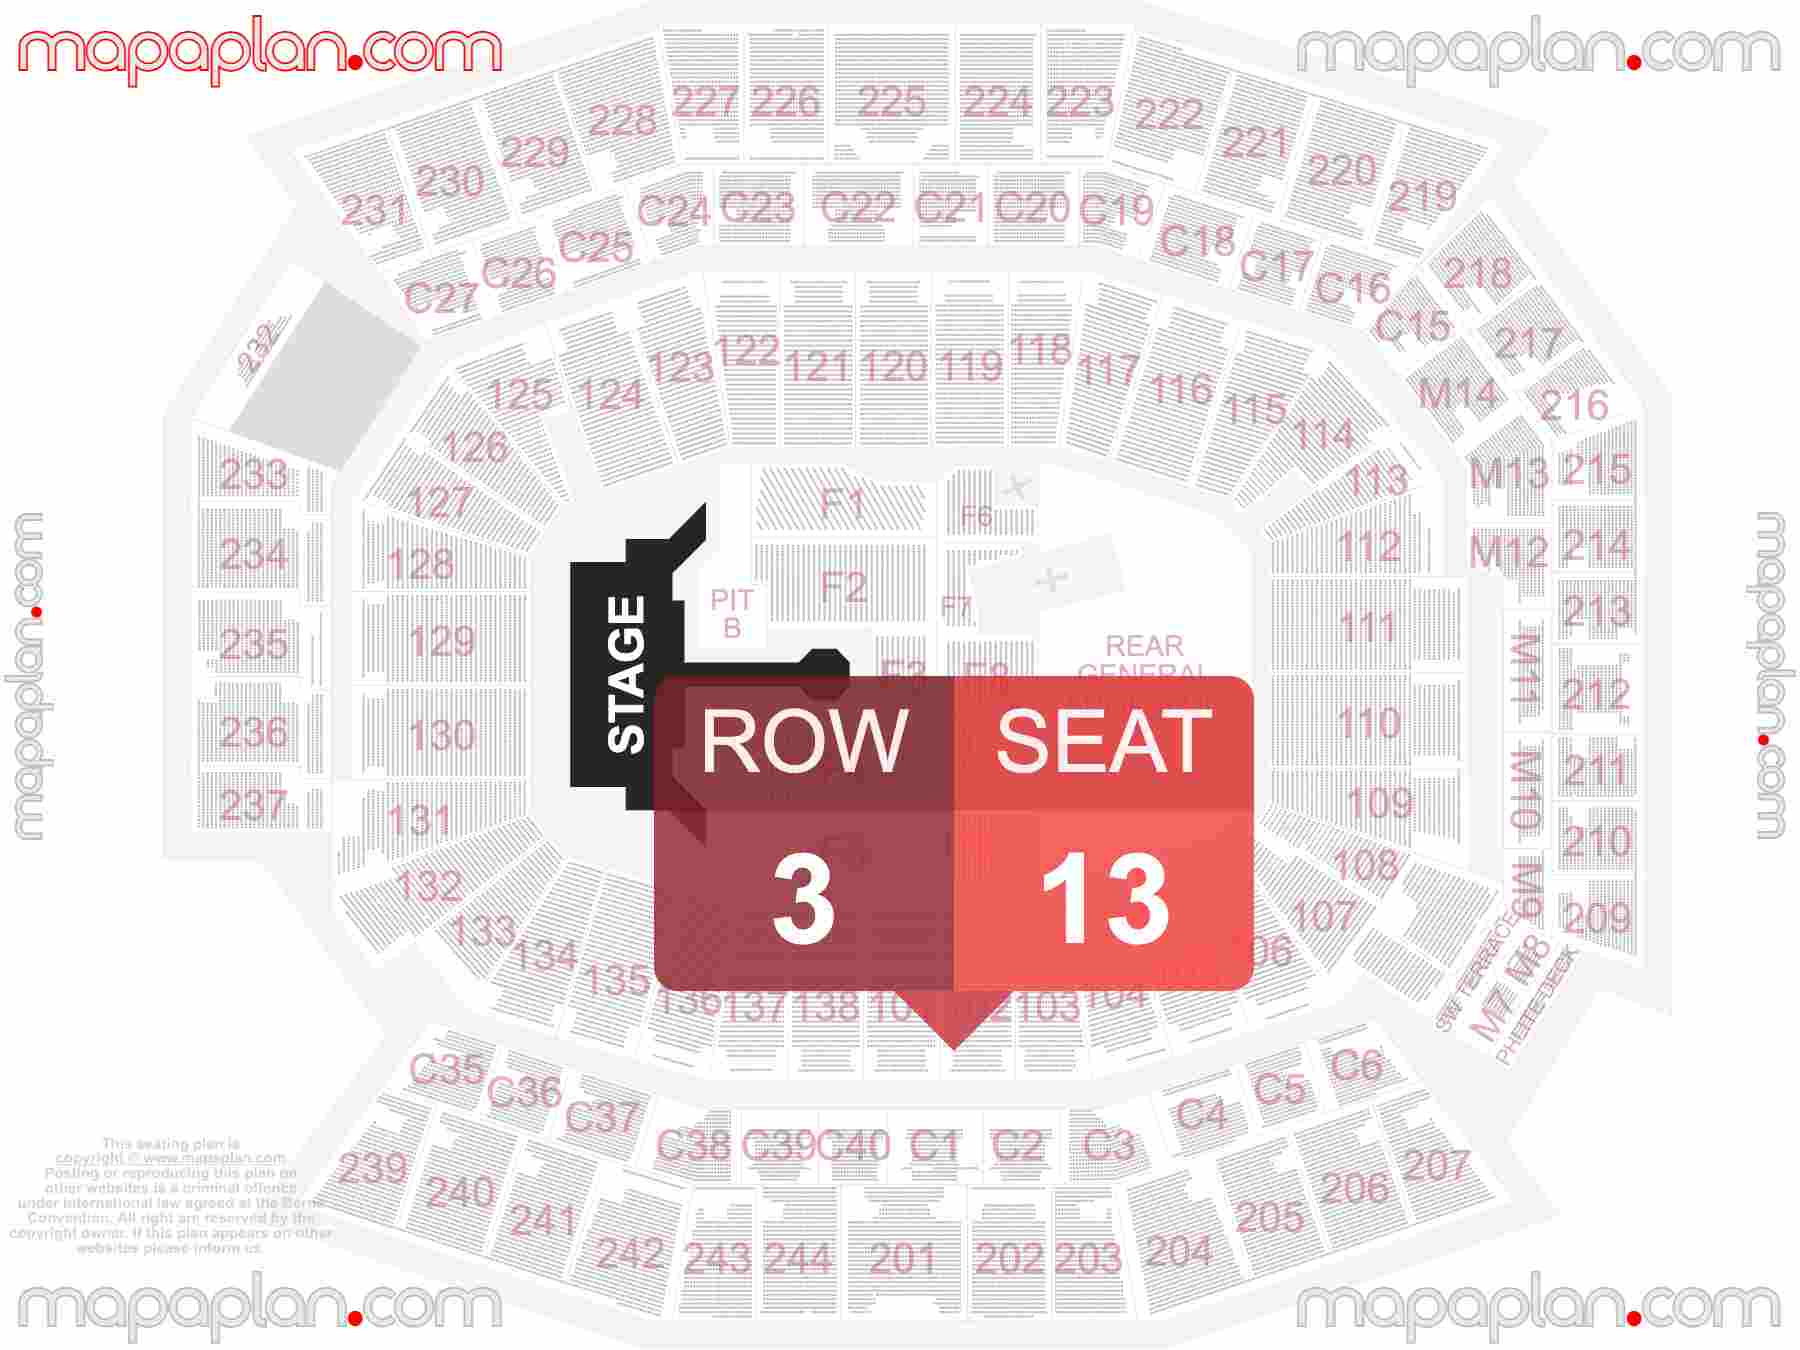 Philadelphia Lincoln Financial Field seating chart Concert with extended catwalk runway B-stage seating chart with exact section numbers showing best rows and seats selection 3d layout - Best interactive seat finder tool with precise detailed location data